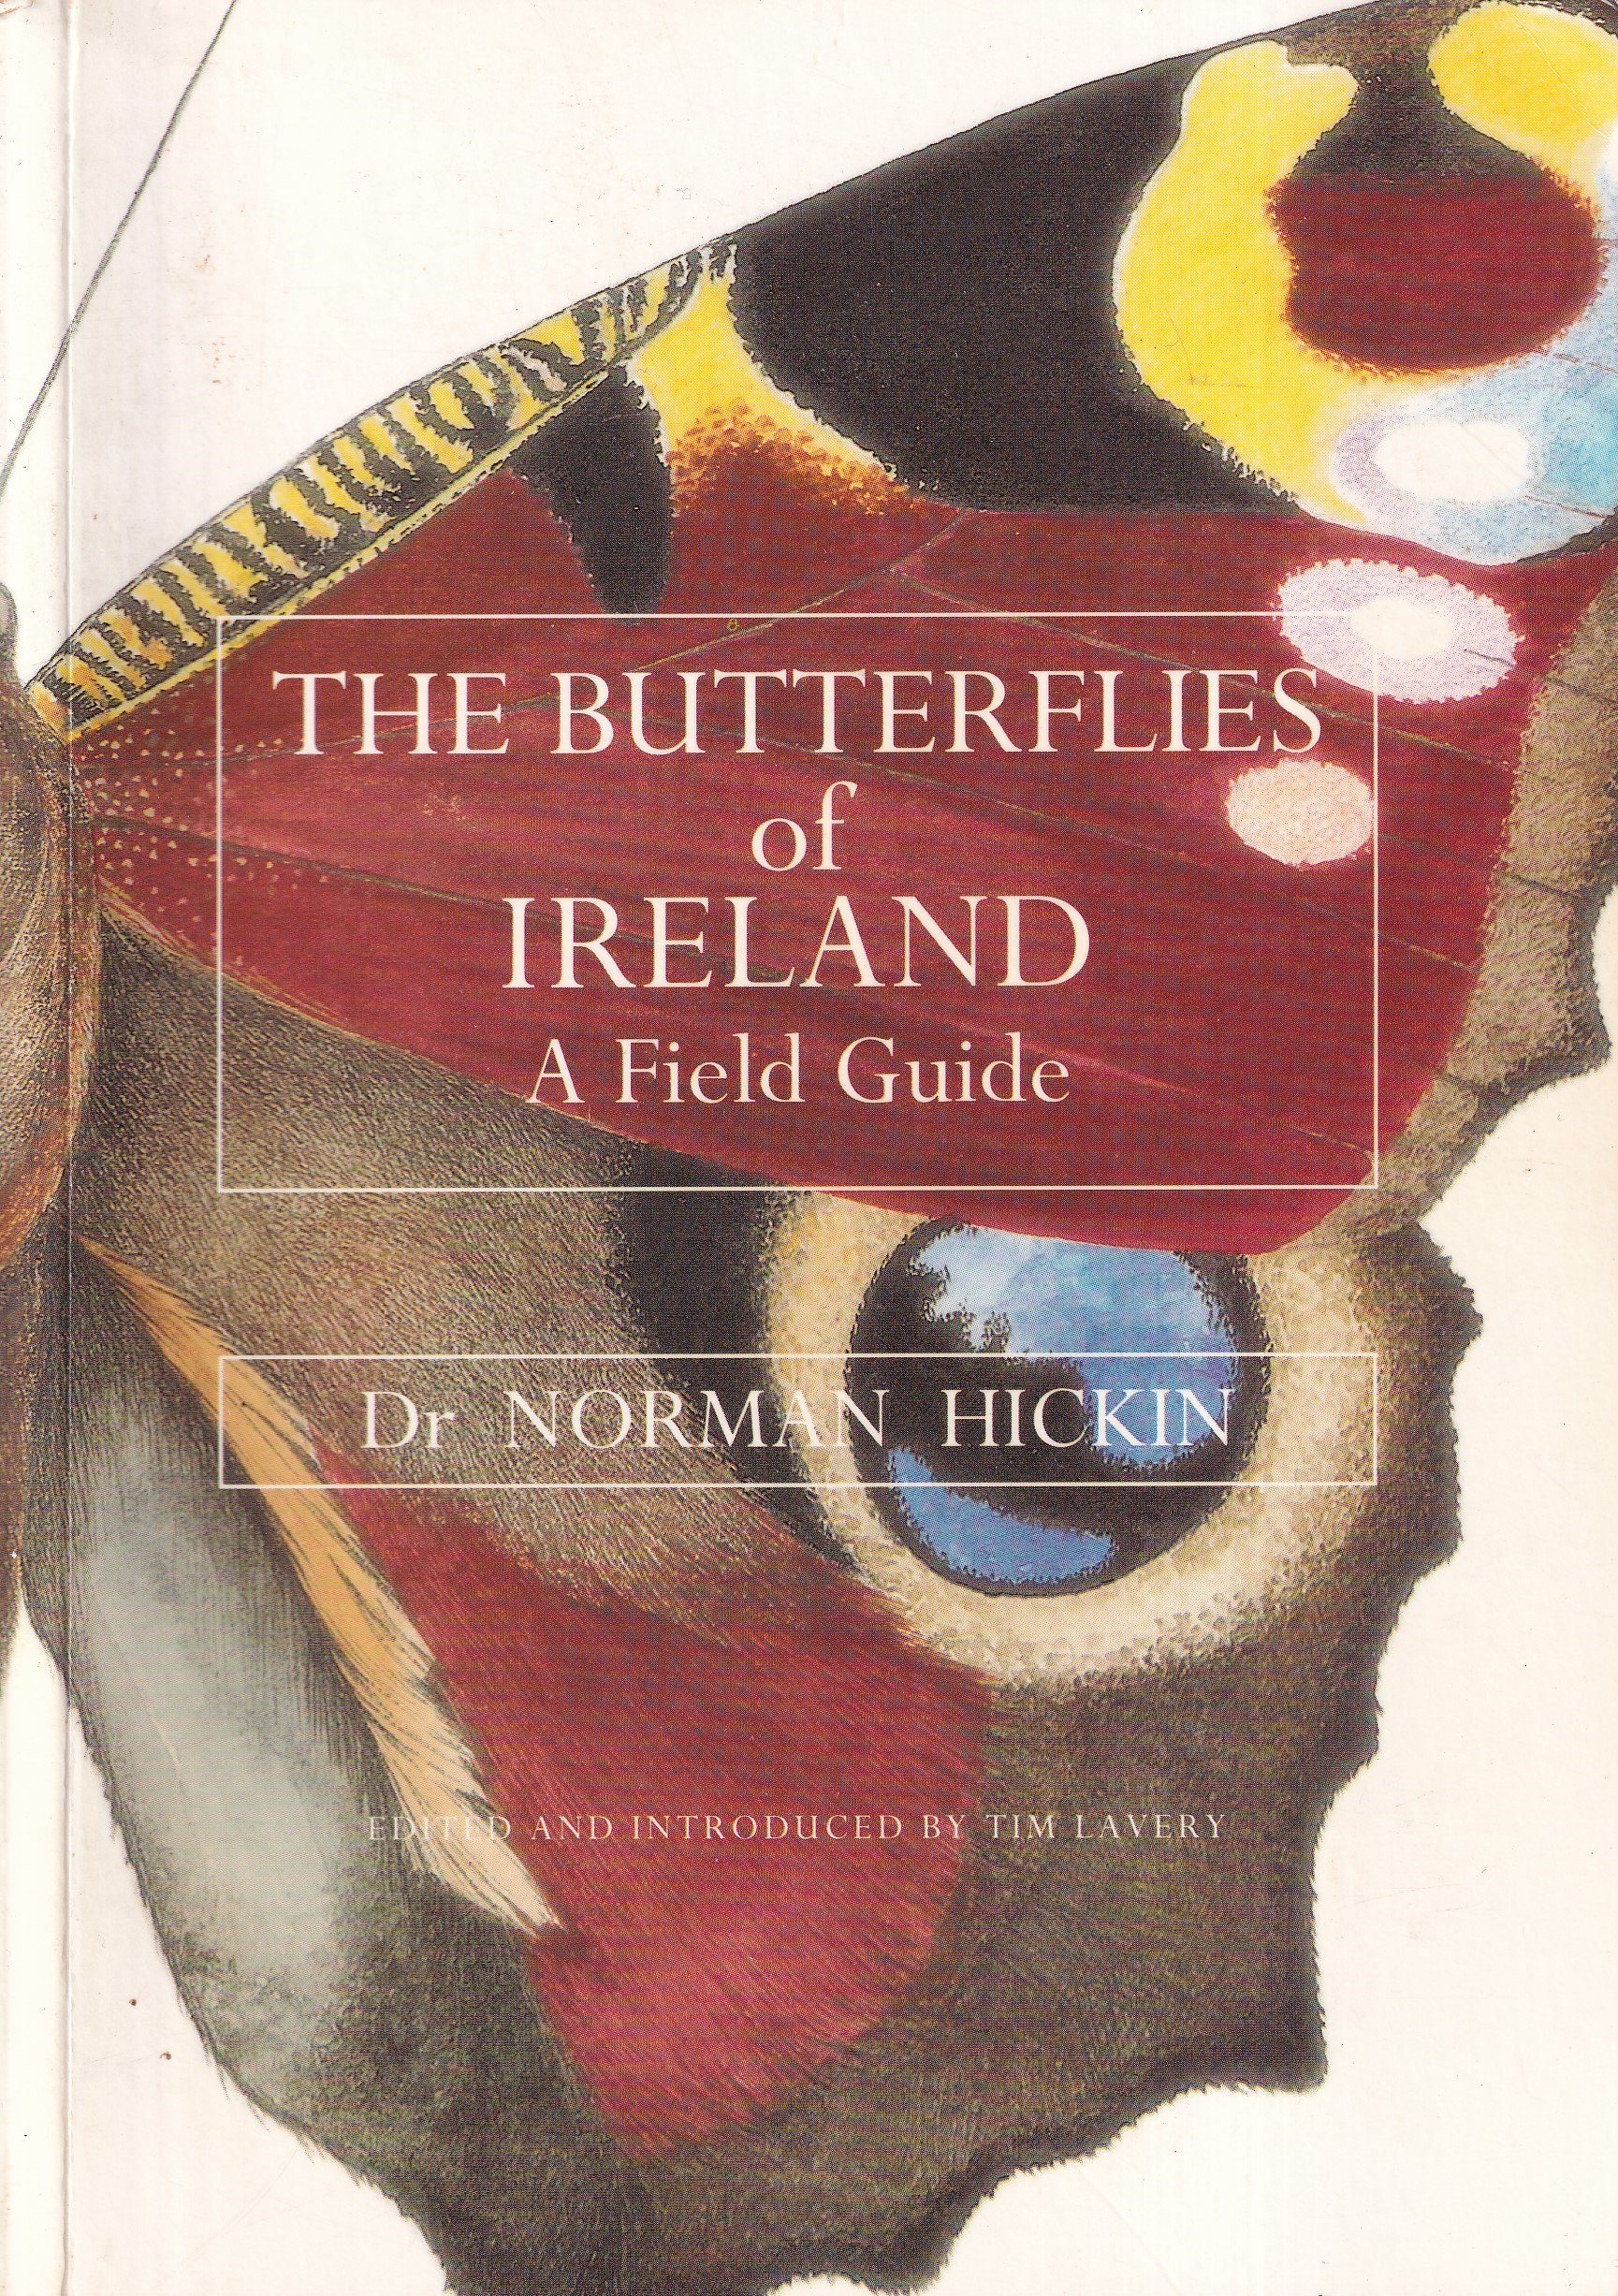 The Butterflies of Ireland: A Field Guide | Dr Norman Hickin | Charlie Byrne's